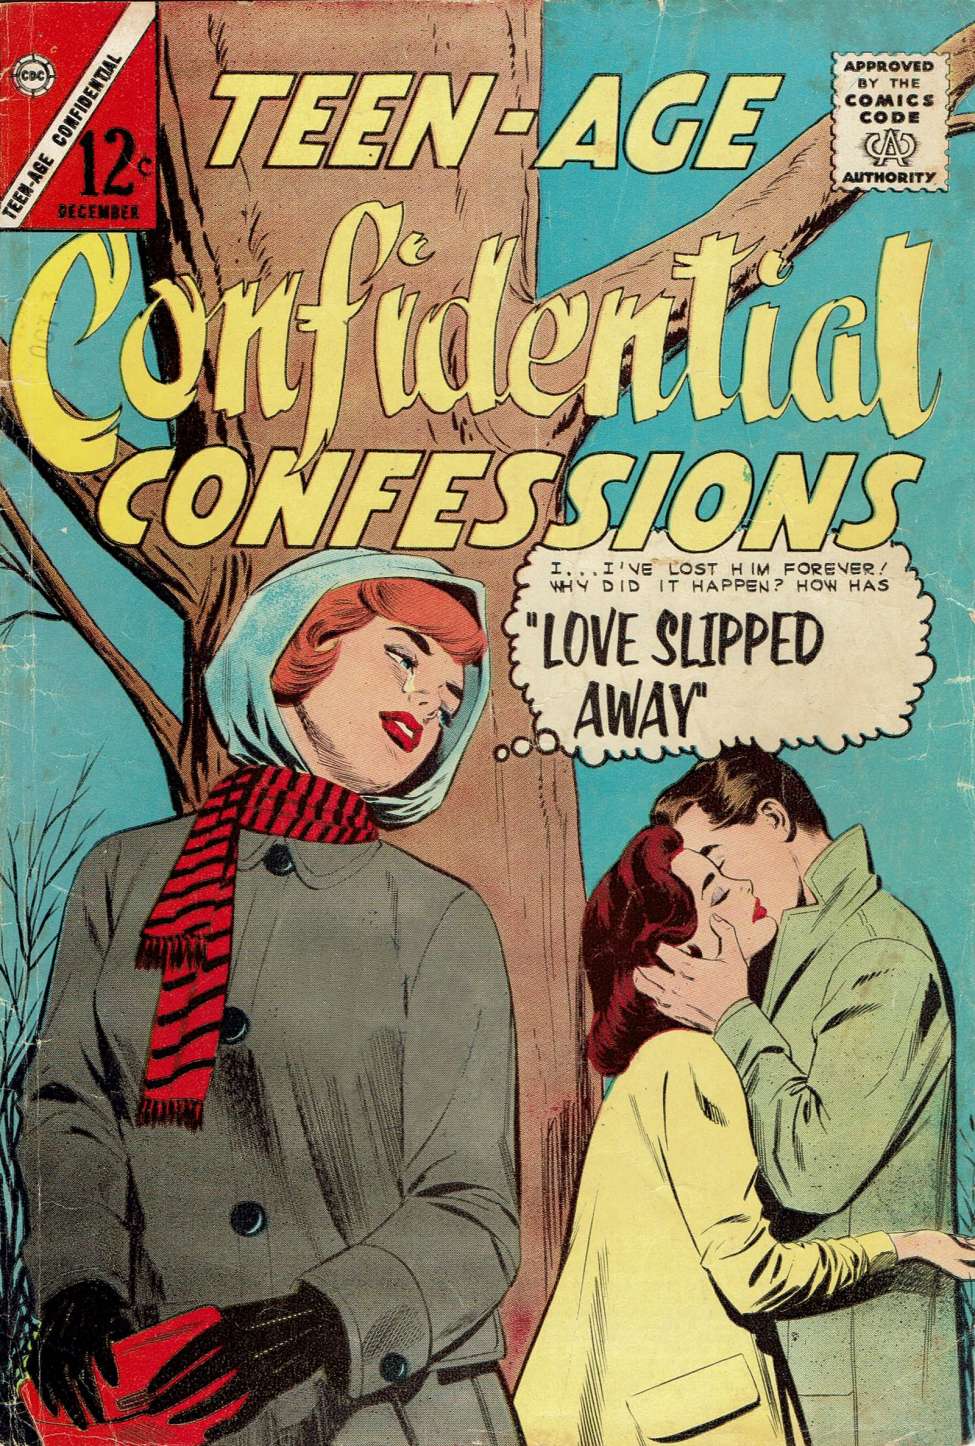 Book Cover For Teen-Age Confidential Confessions 21